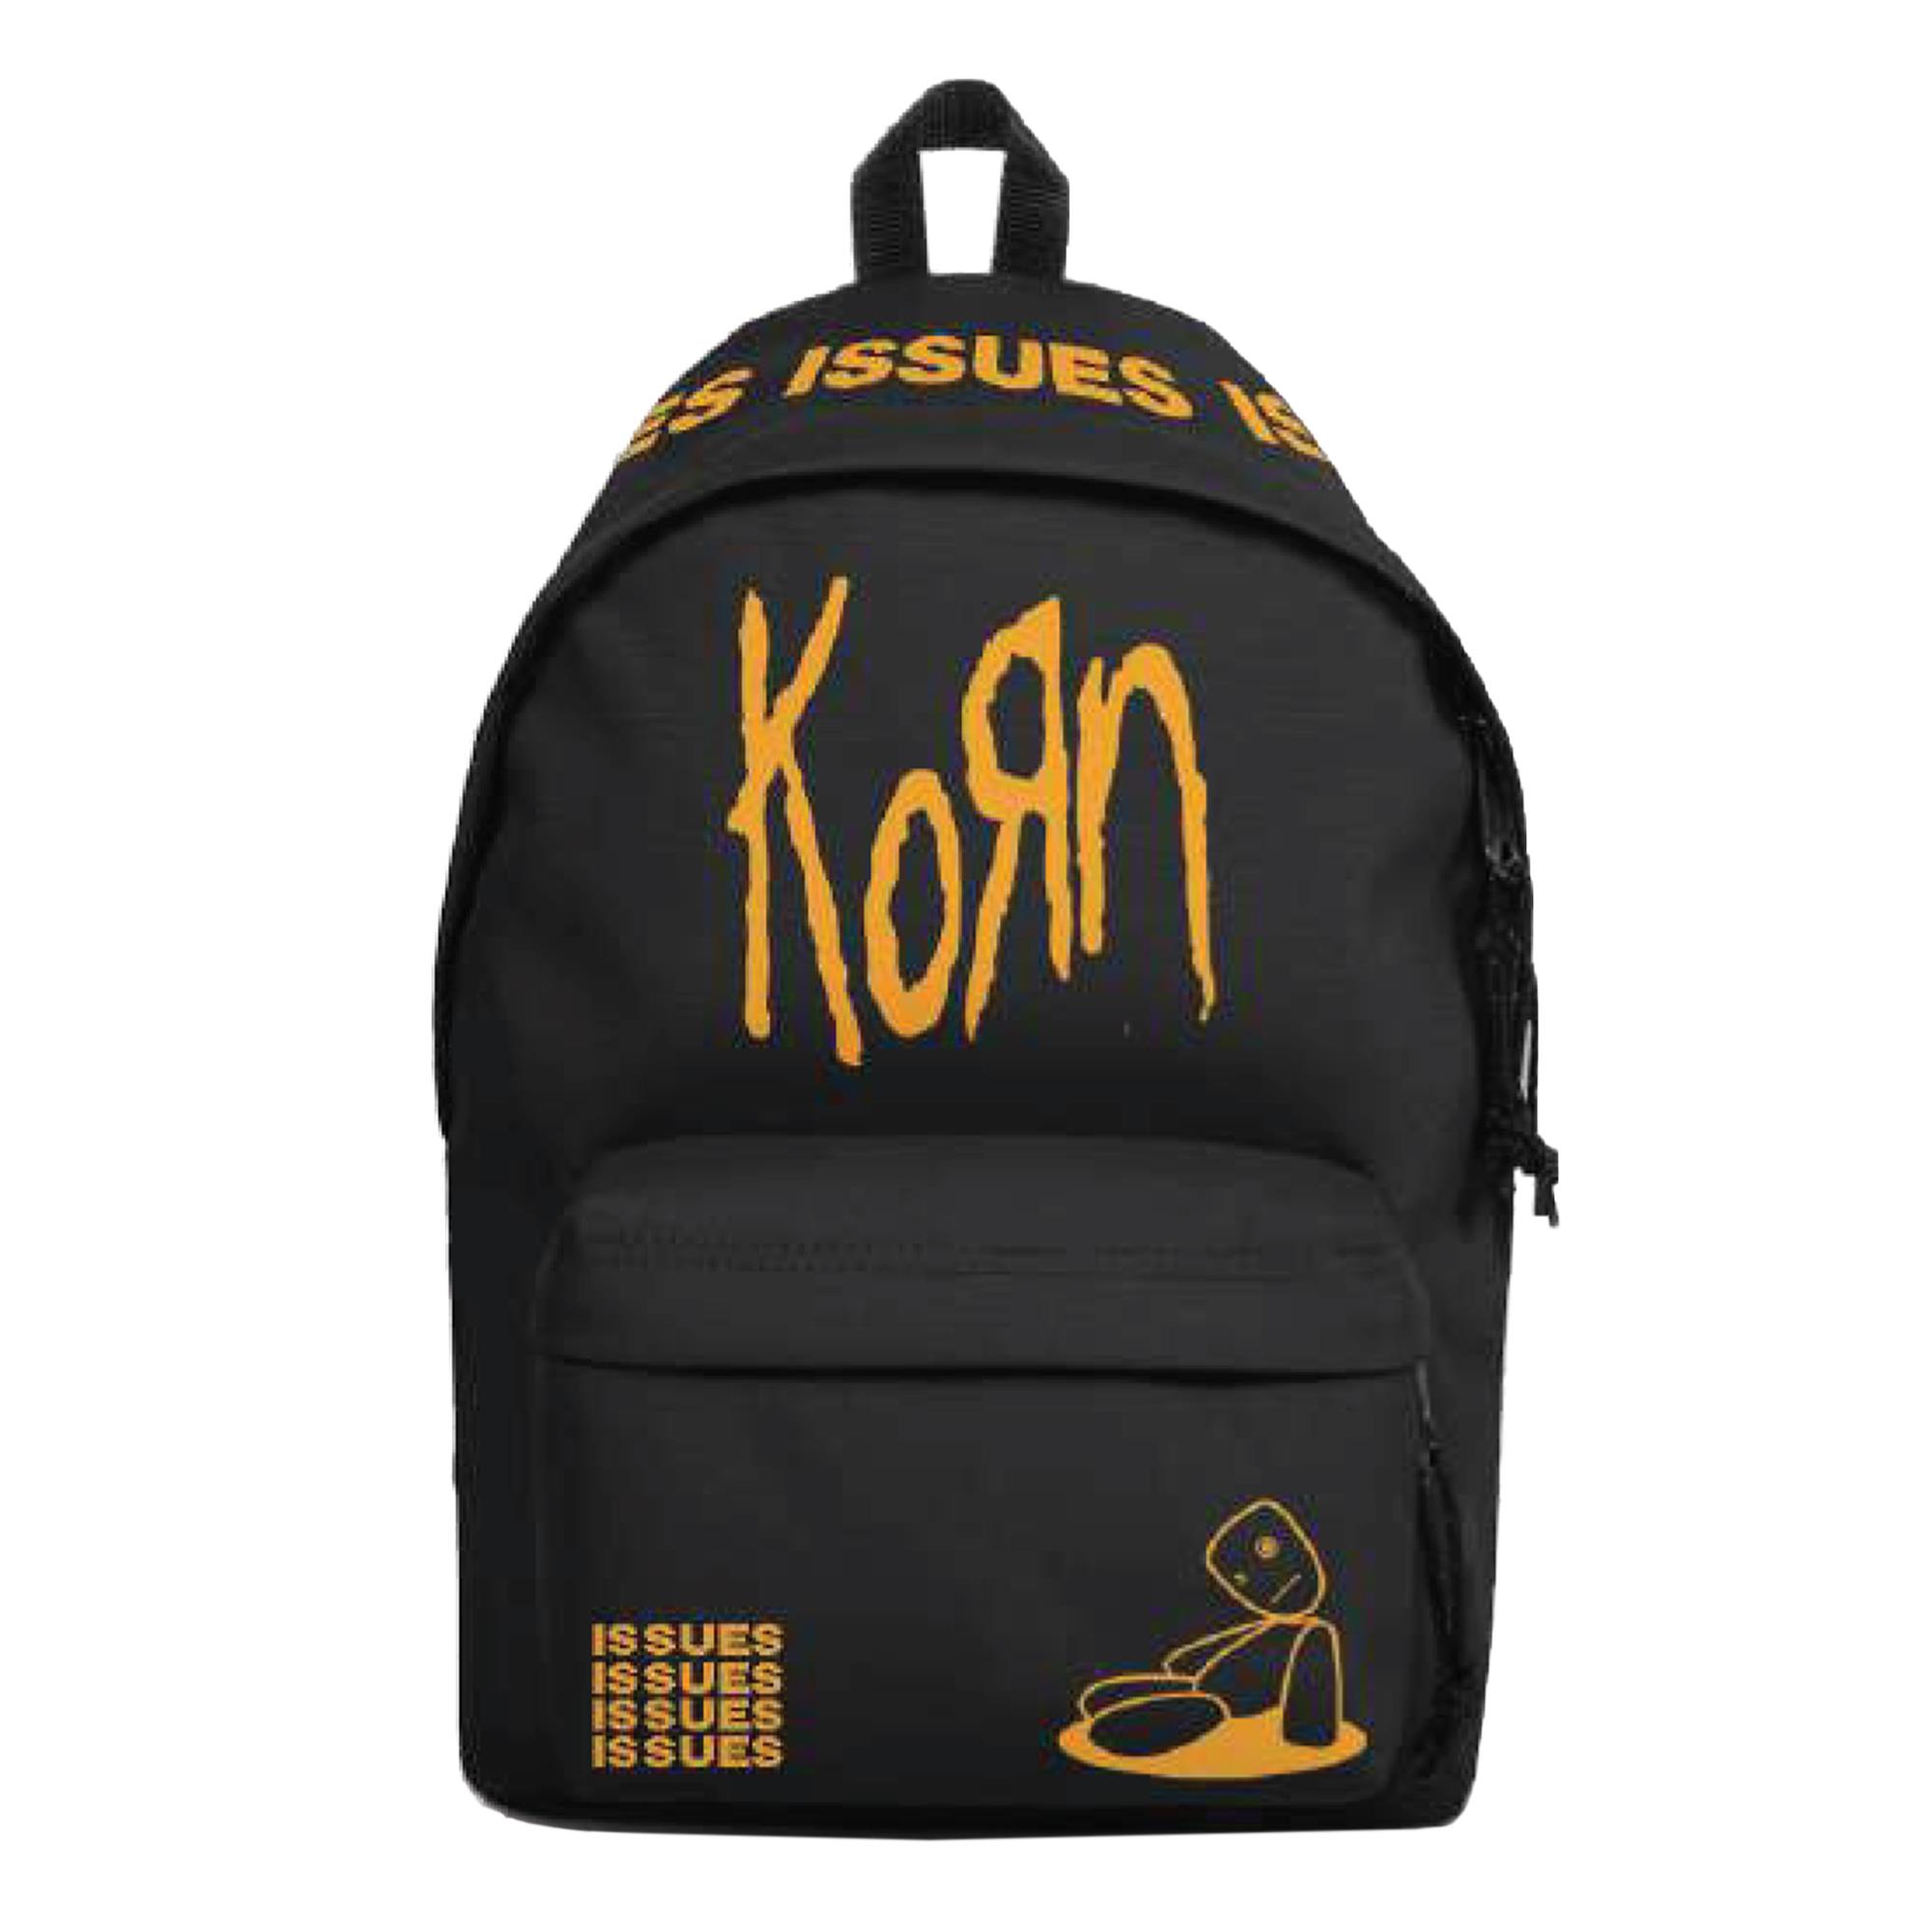 Issues Backpack